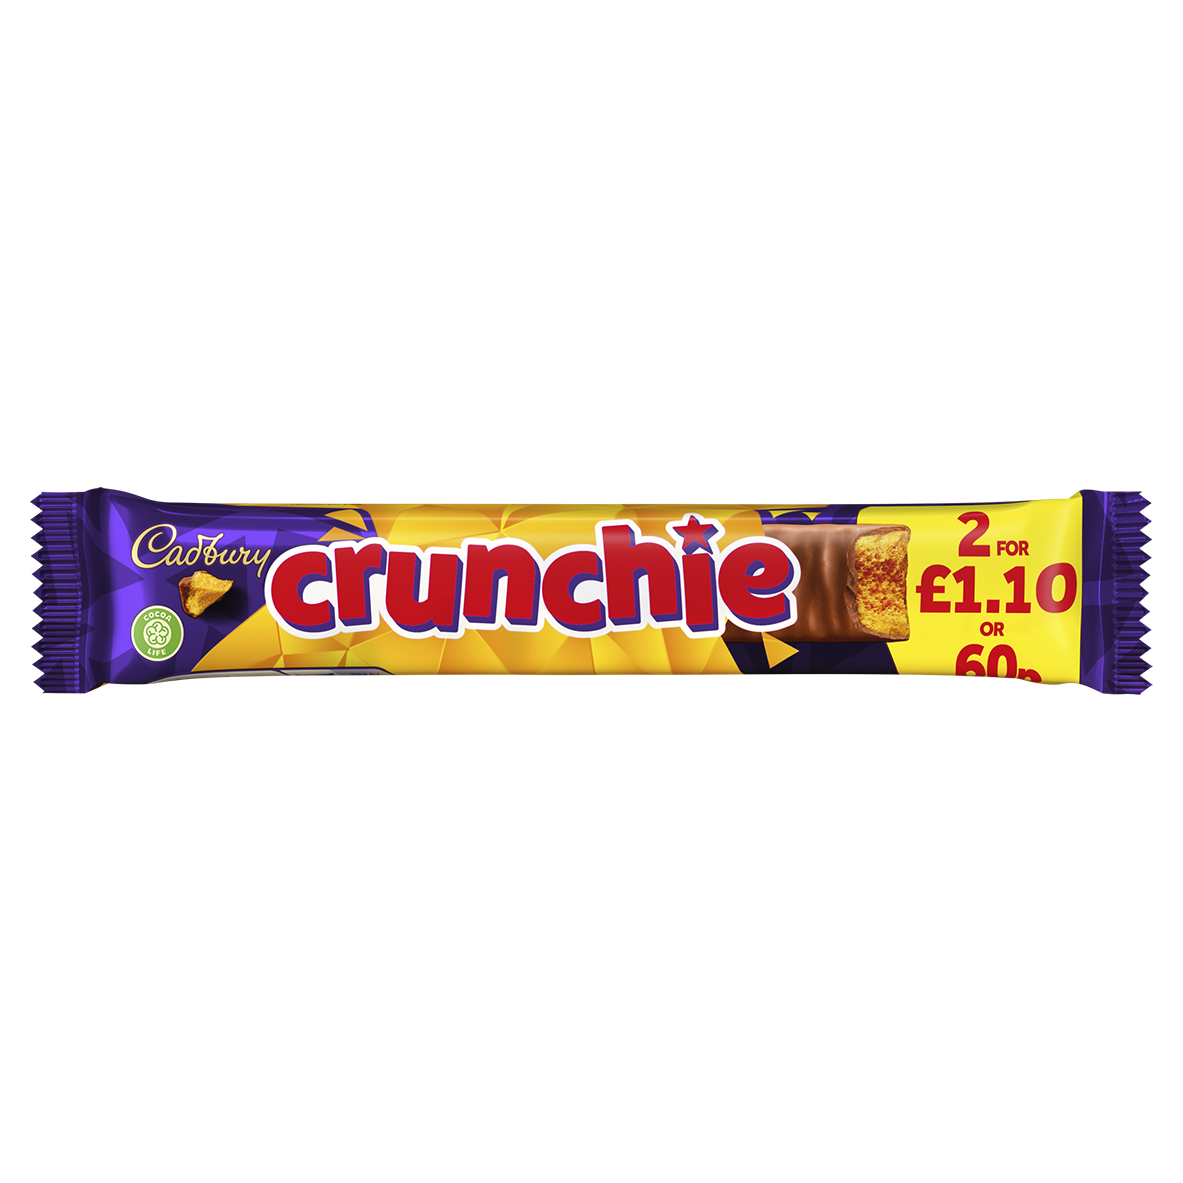 Cadbury launches bestsellers two-for-£1.10 PMP